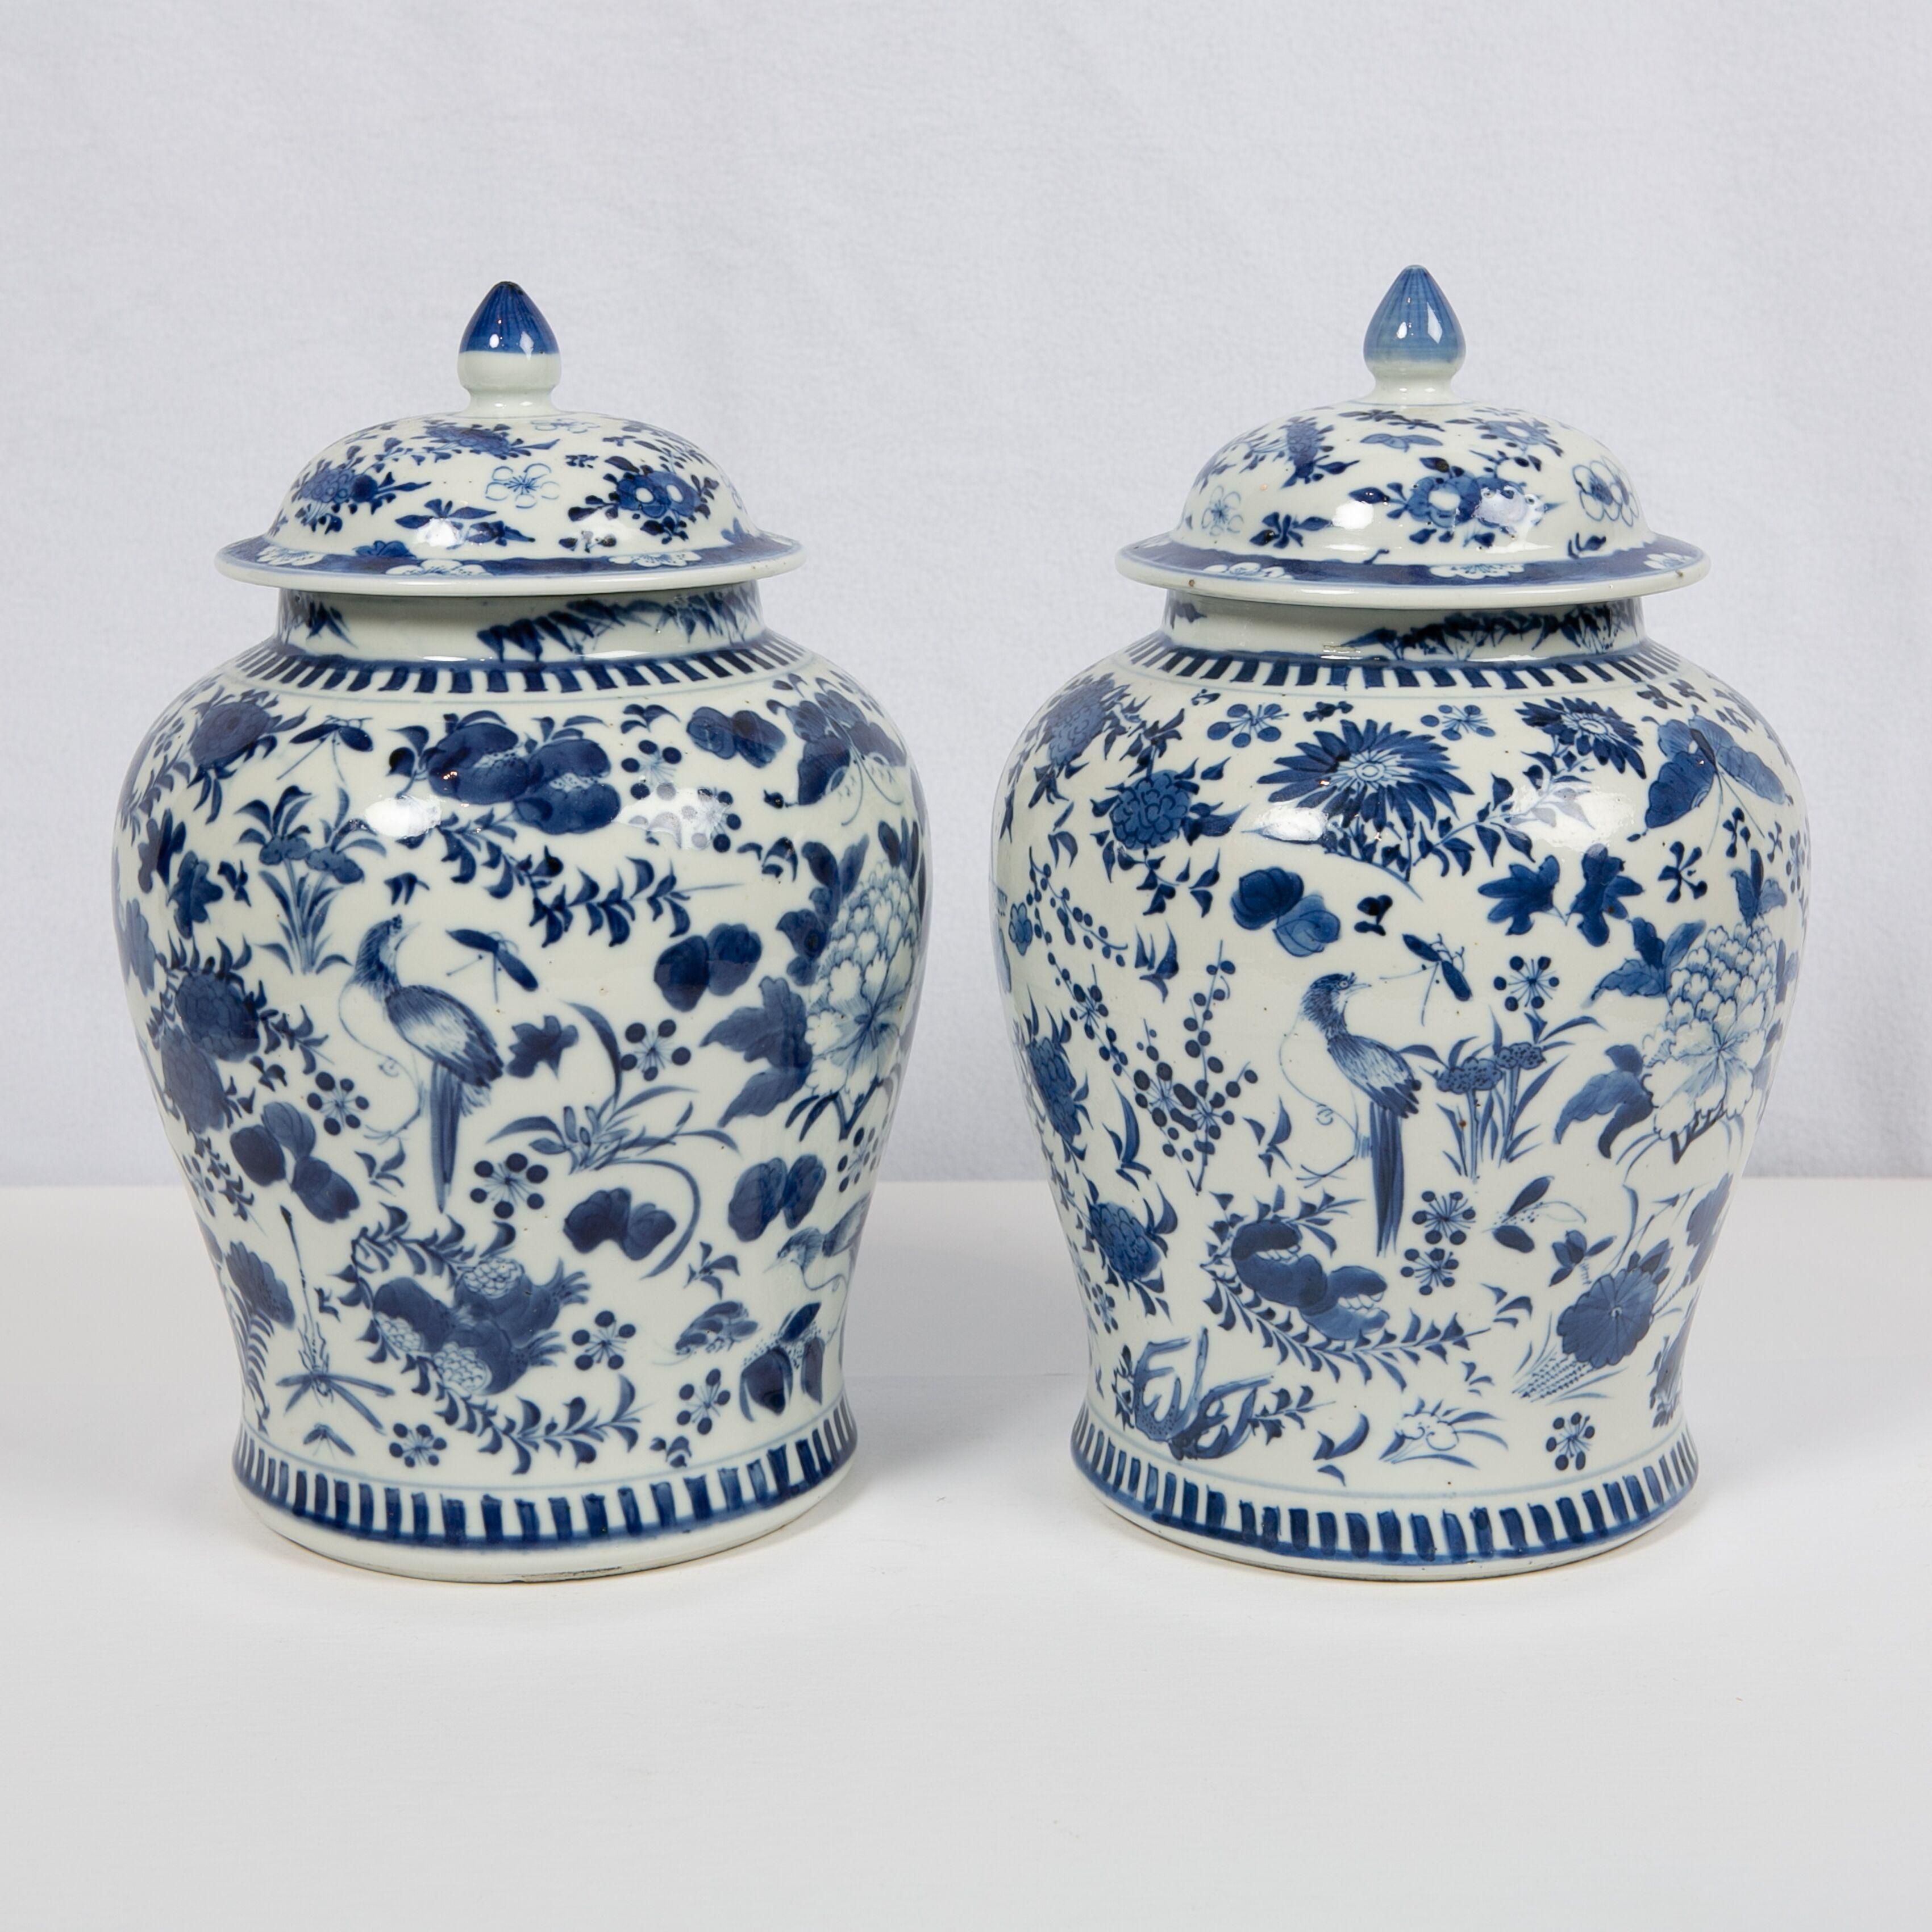 This pair of Chinese hand painted blue and white covered jars can be dated to the second half of the 19th century during the Qing dynasty (1644-1911). Fully painted with a bird-and-flower theme, this lovely pair of jars are rich in symbolism. On the